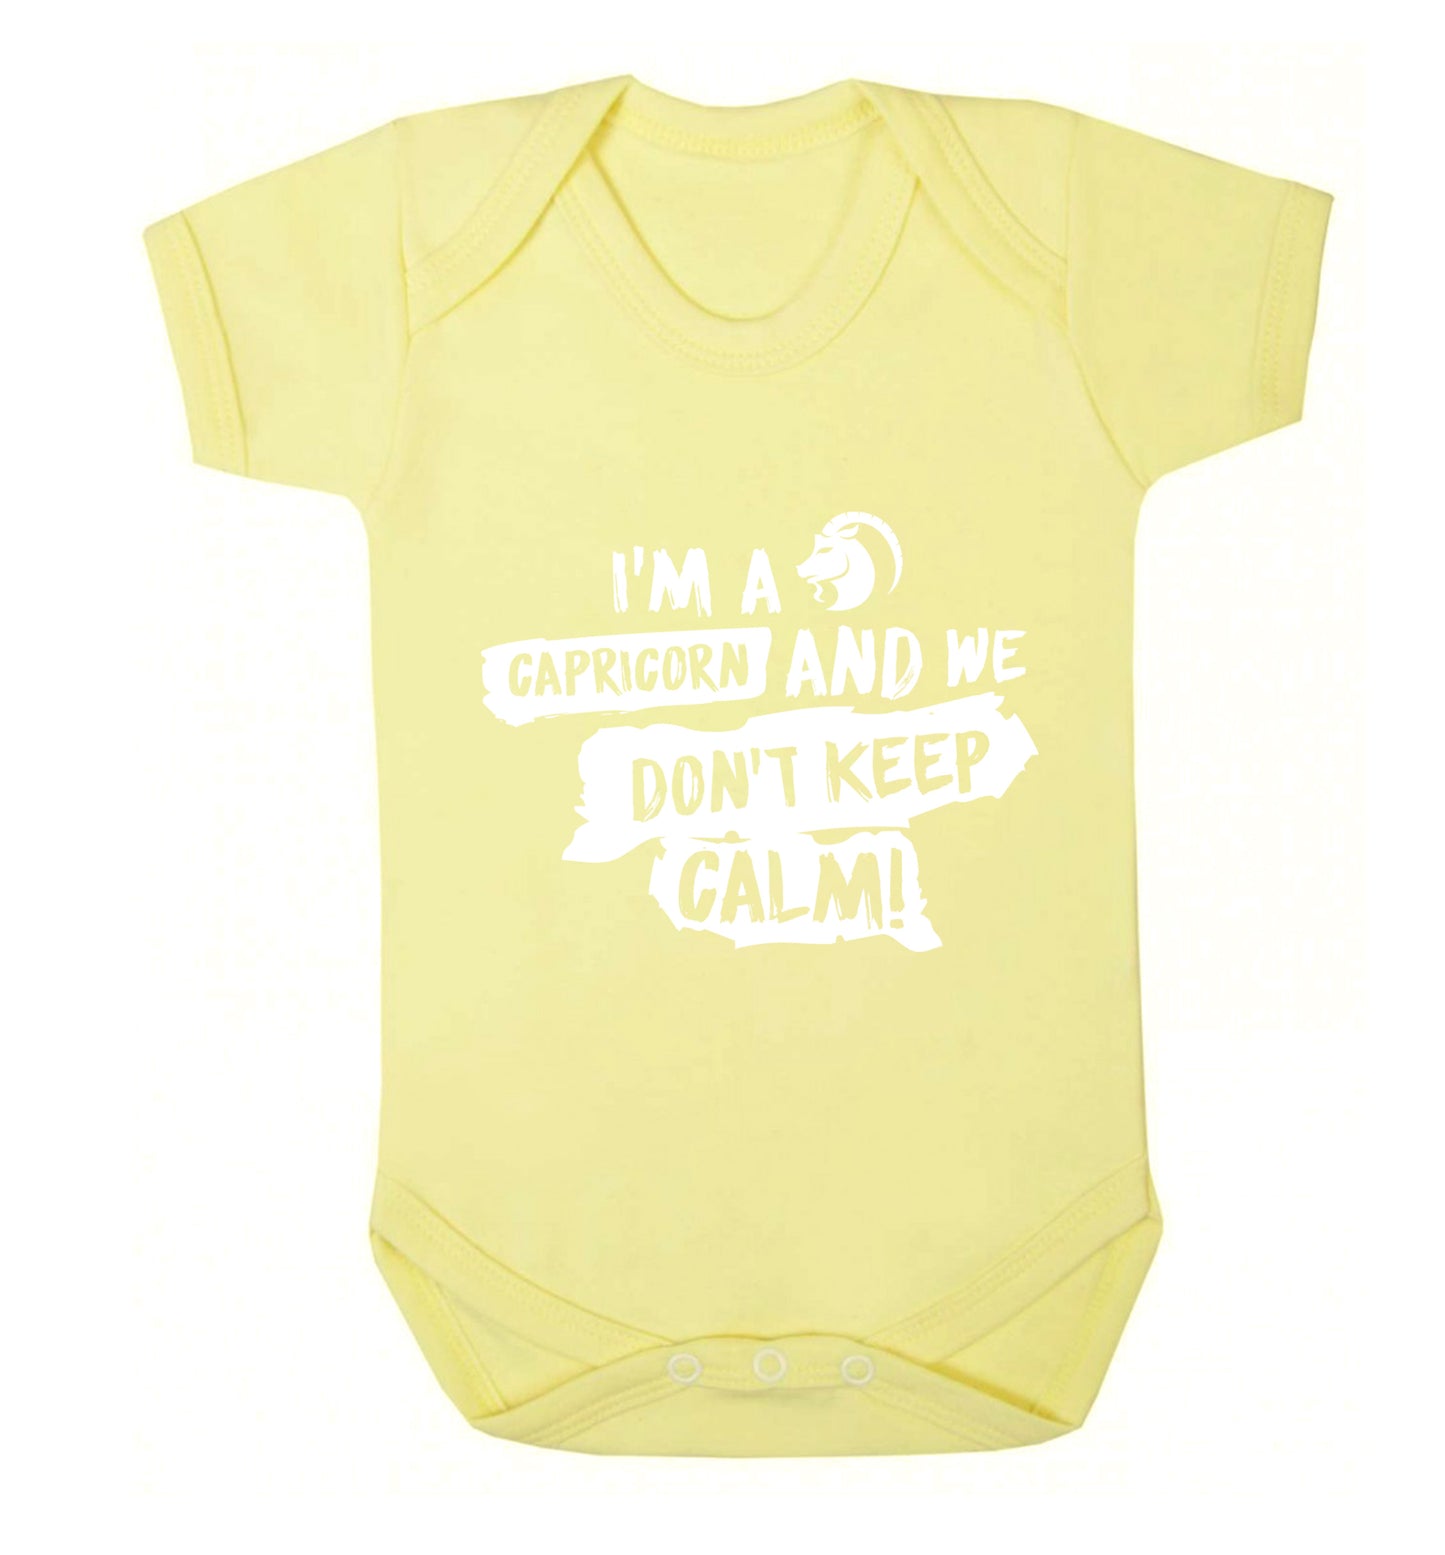 I'm a capricorn and we don't keep calm Baby Vest pale yellow 18-24 months